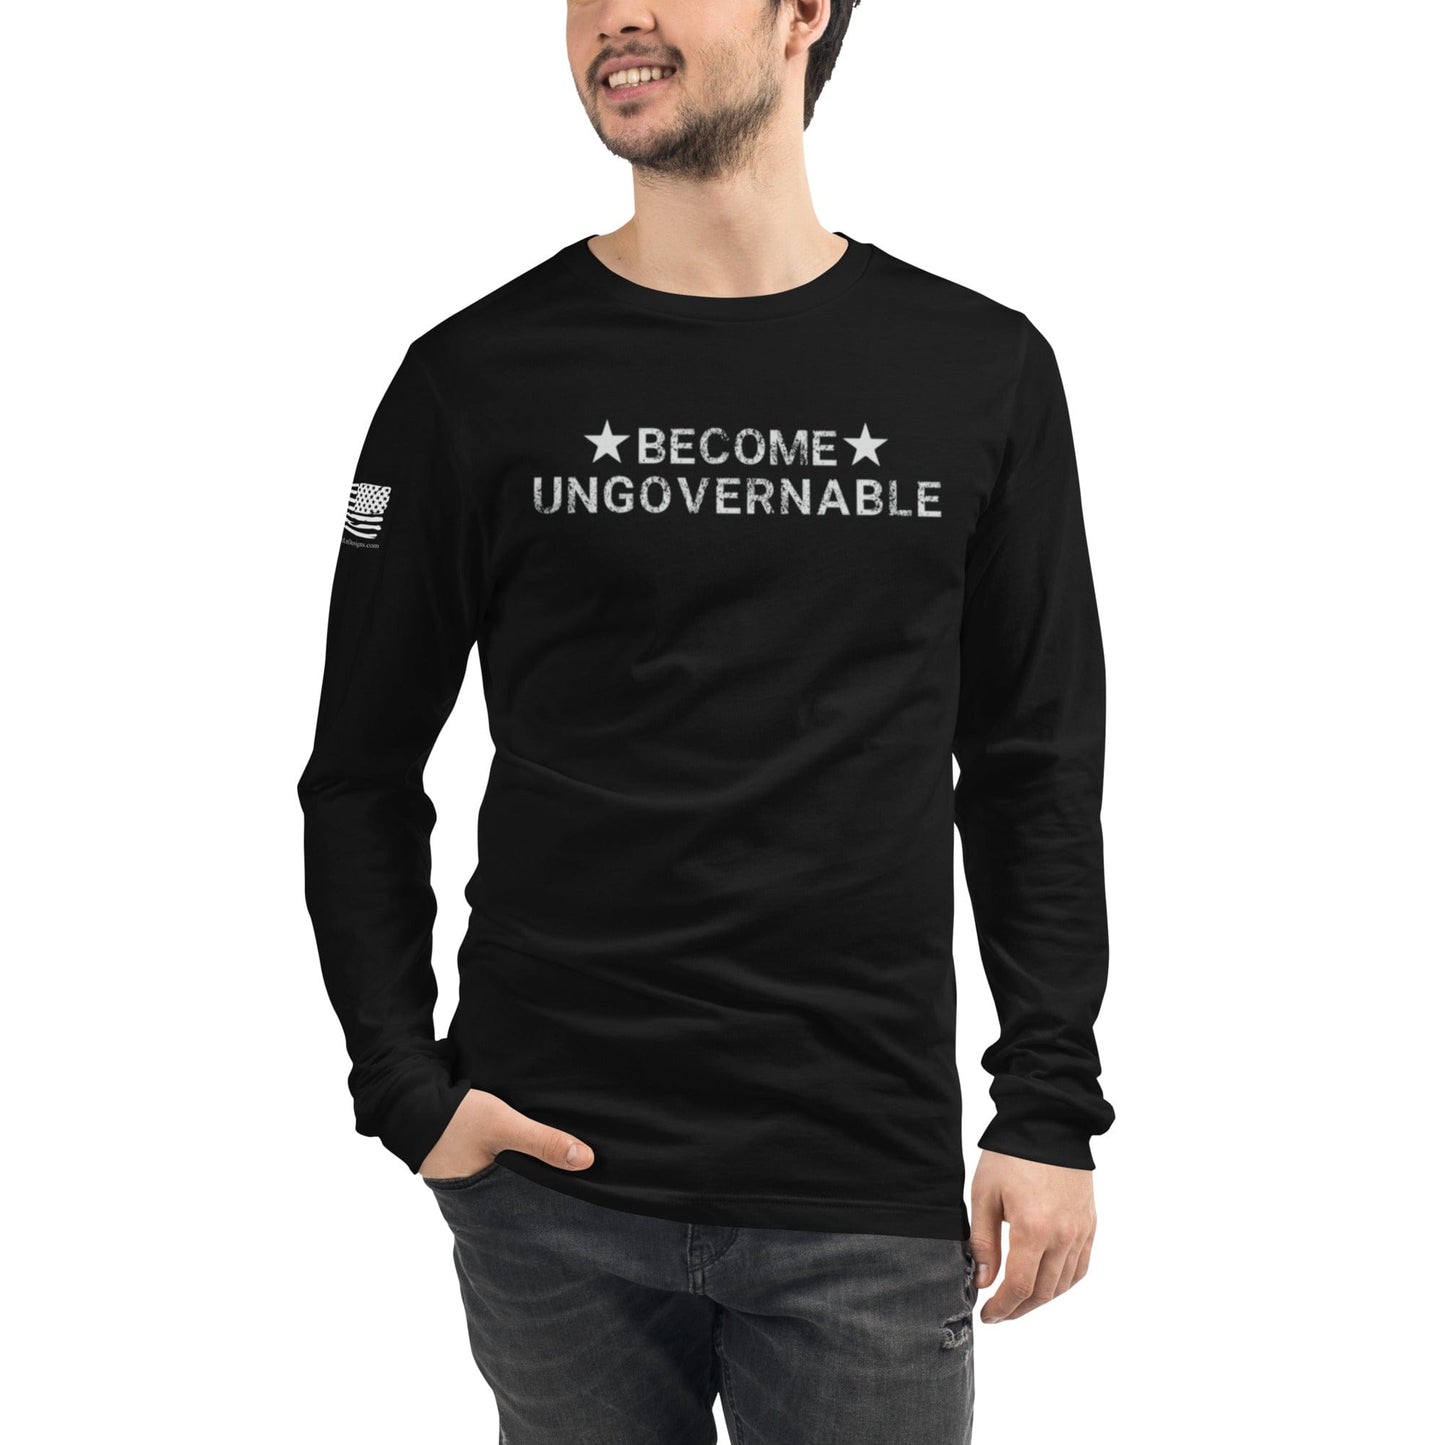 FreedomKat Designs Long Sleeved Shirt Black / S Become Ungovernable Long Sleeve Shirt